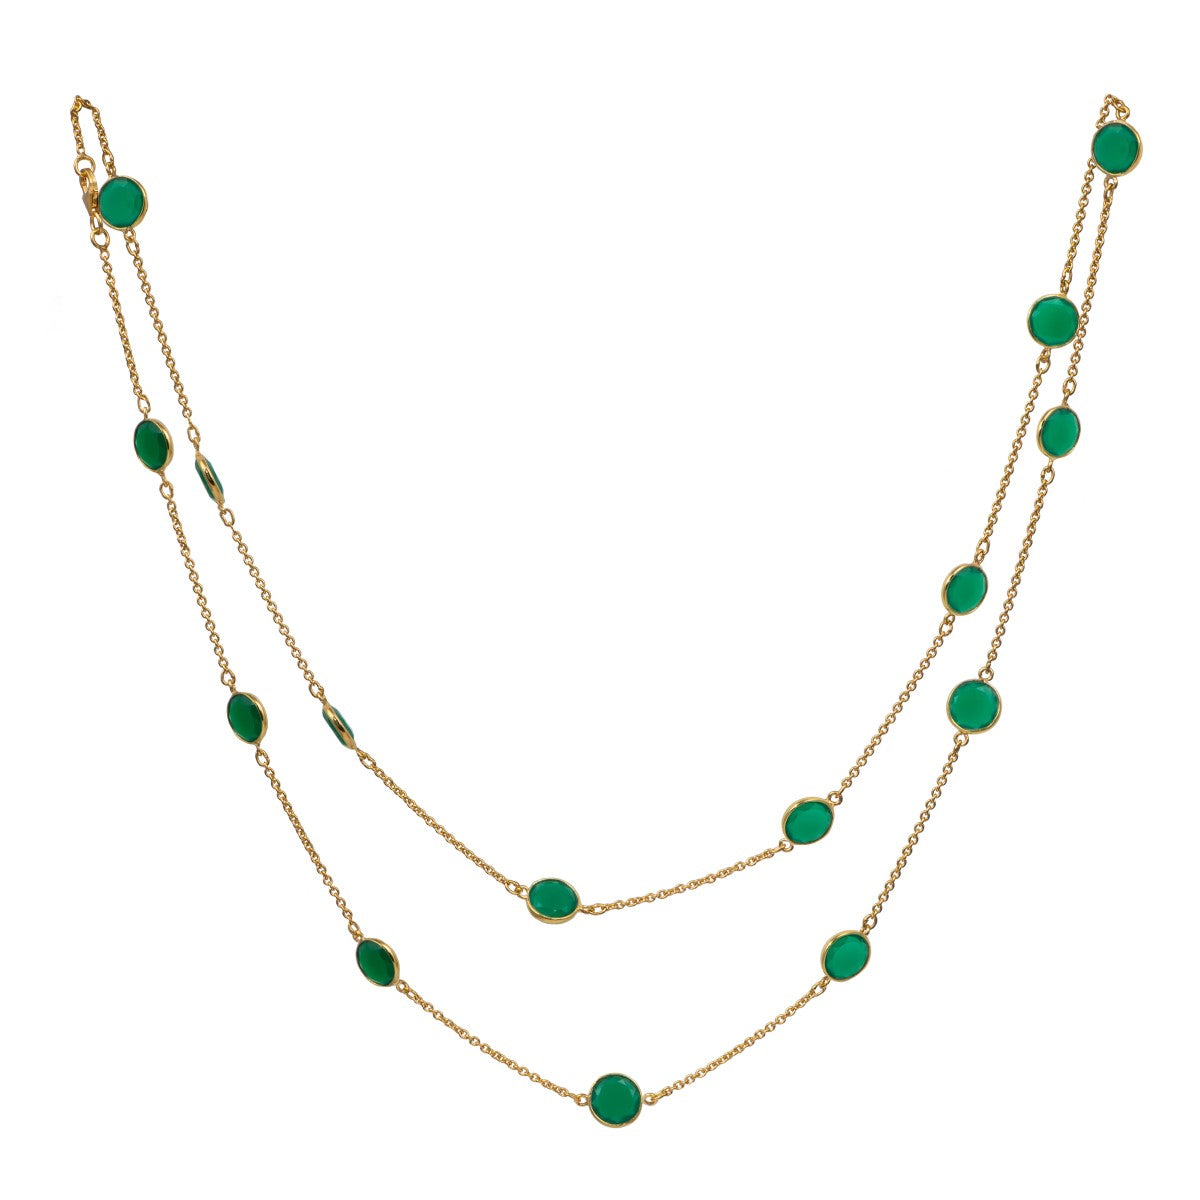 Green Onyx Gemstone Necklace in Gold Plated Sterling Silver